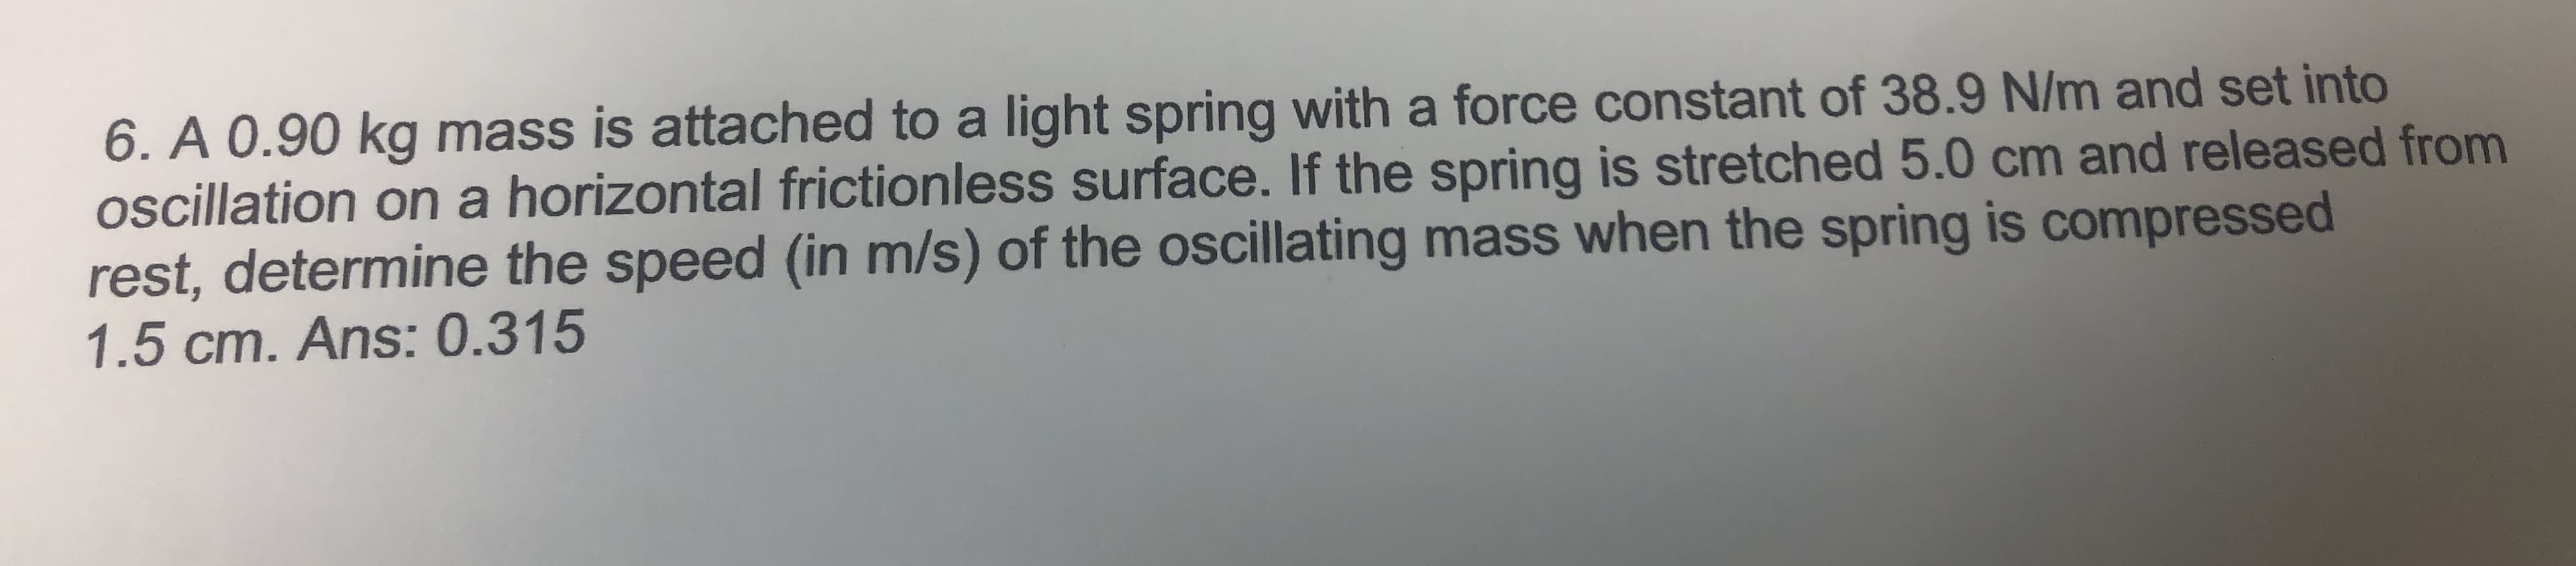 6. A 0.90 kg mass is attached to a light spring with a force constant of 38.9 N/m and set into
oscillation on a horizontal frictionless surface. If the spring is stretched 5.0 cm and released from
rest, determine the speed (in m/s) of the ocillating mass when the spring is compressed
1.5 cm. Ans: 0.315
